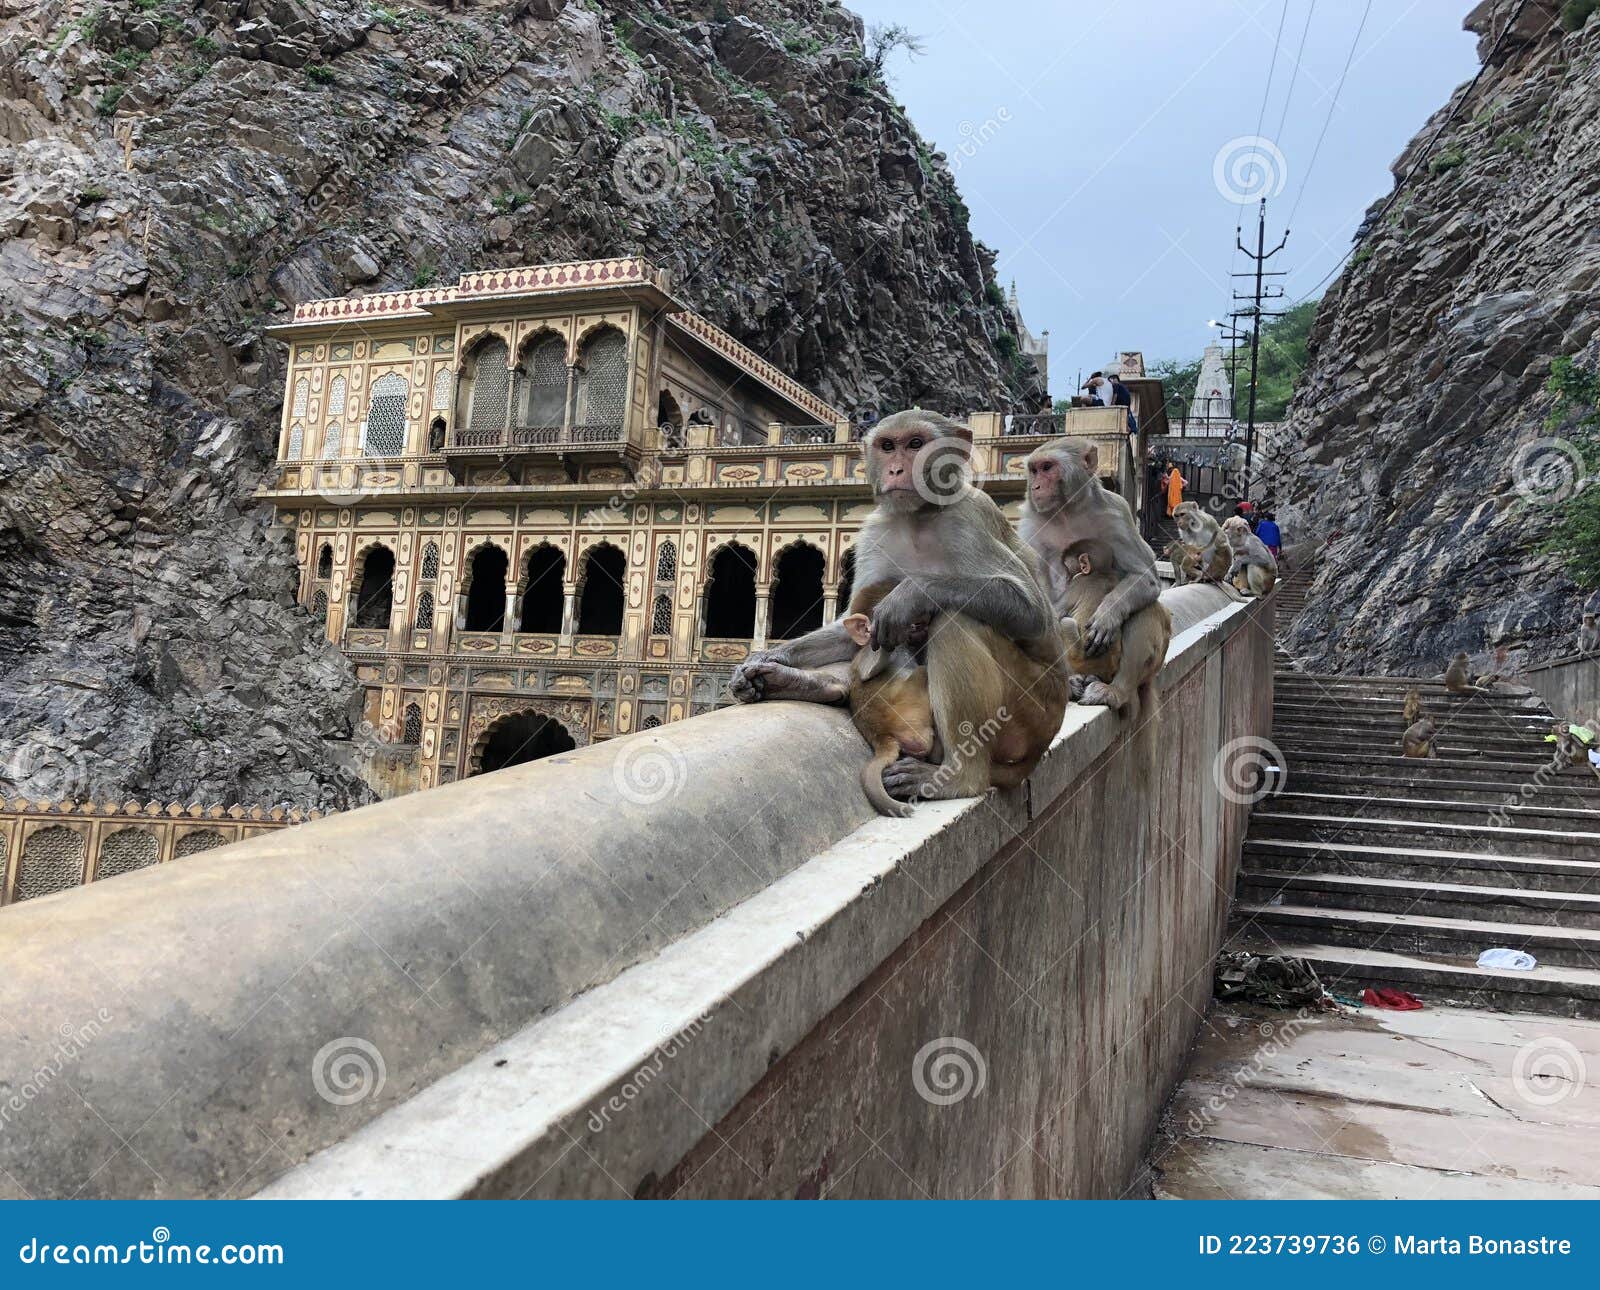 monkey temple in india